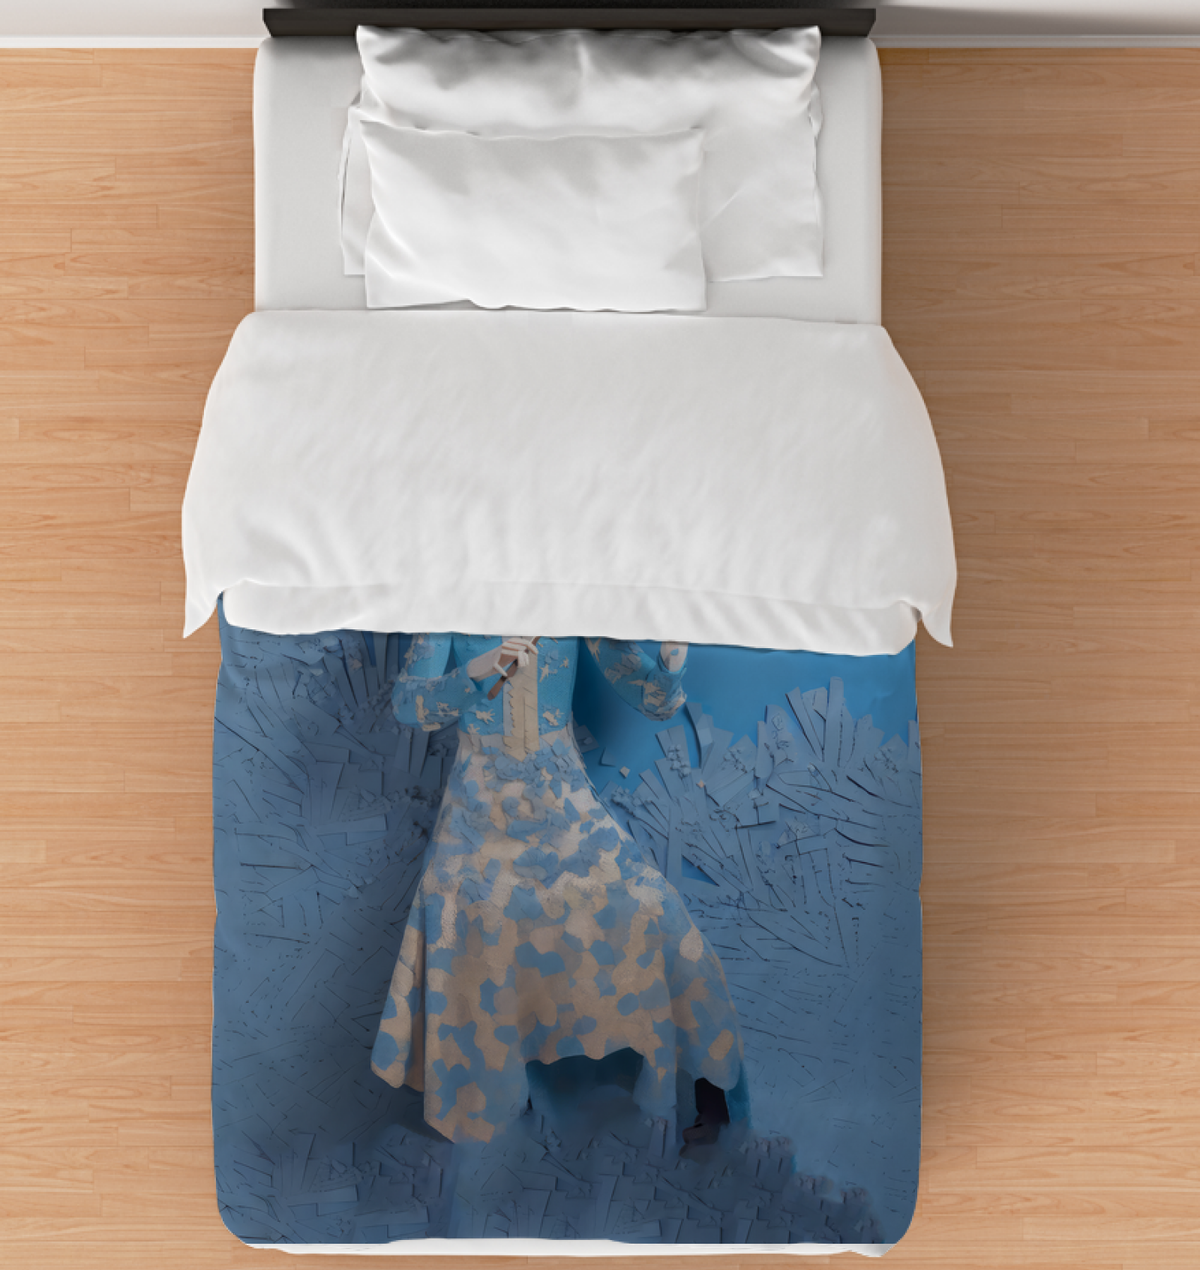 Artistic paper cut coral reef pattern on duvet cover.